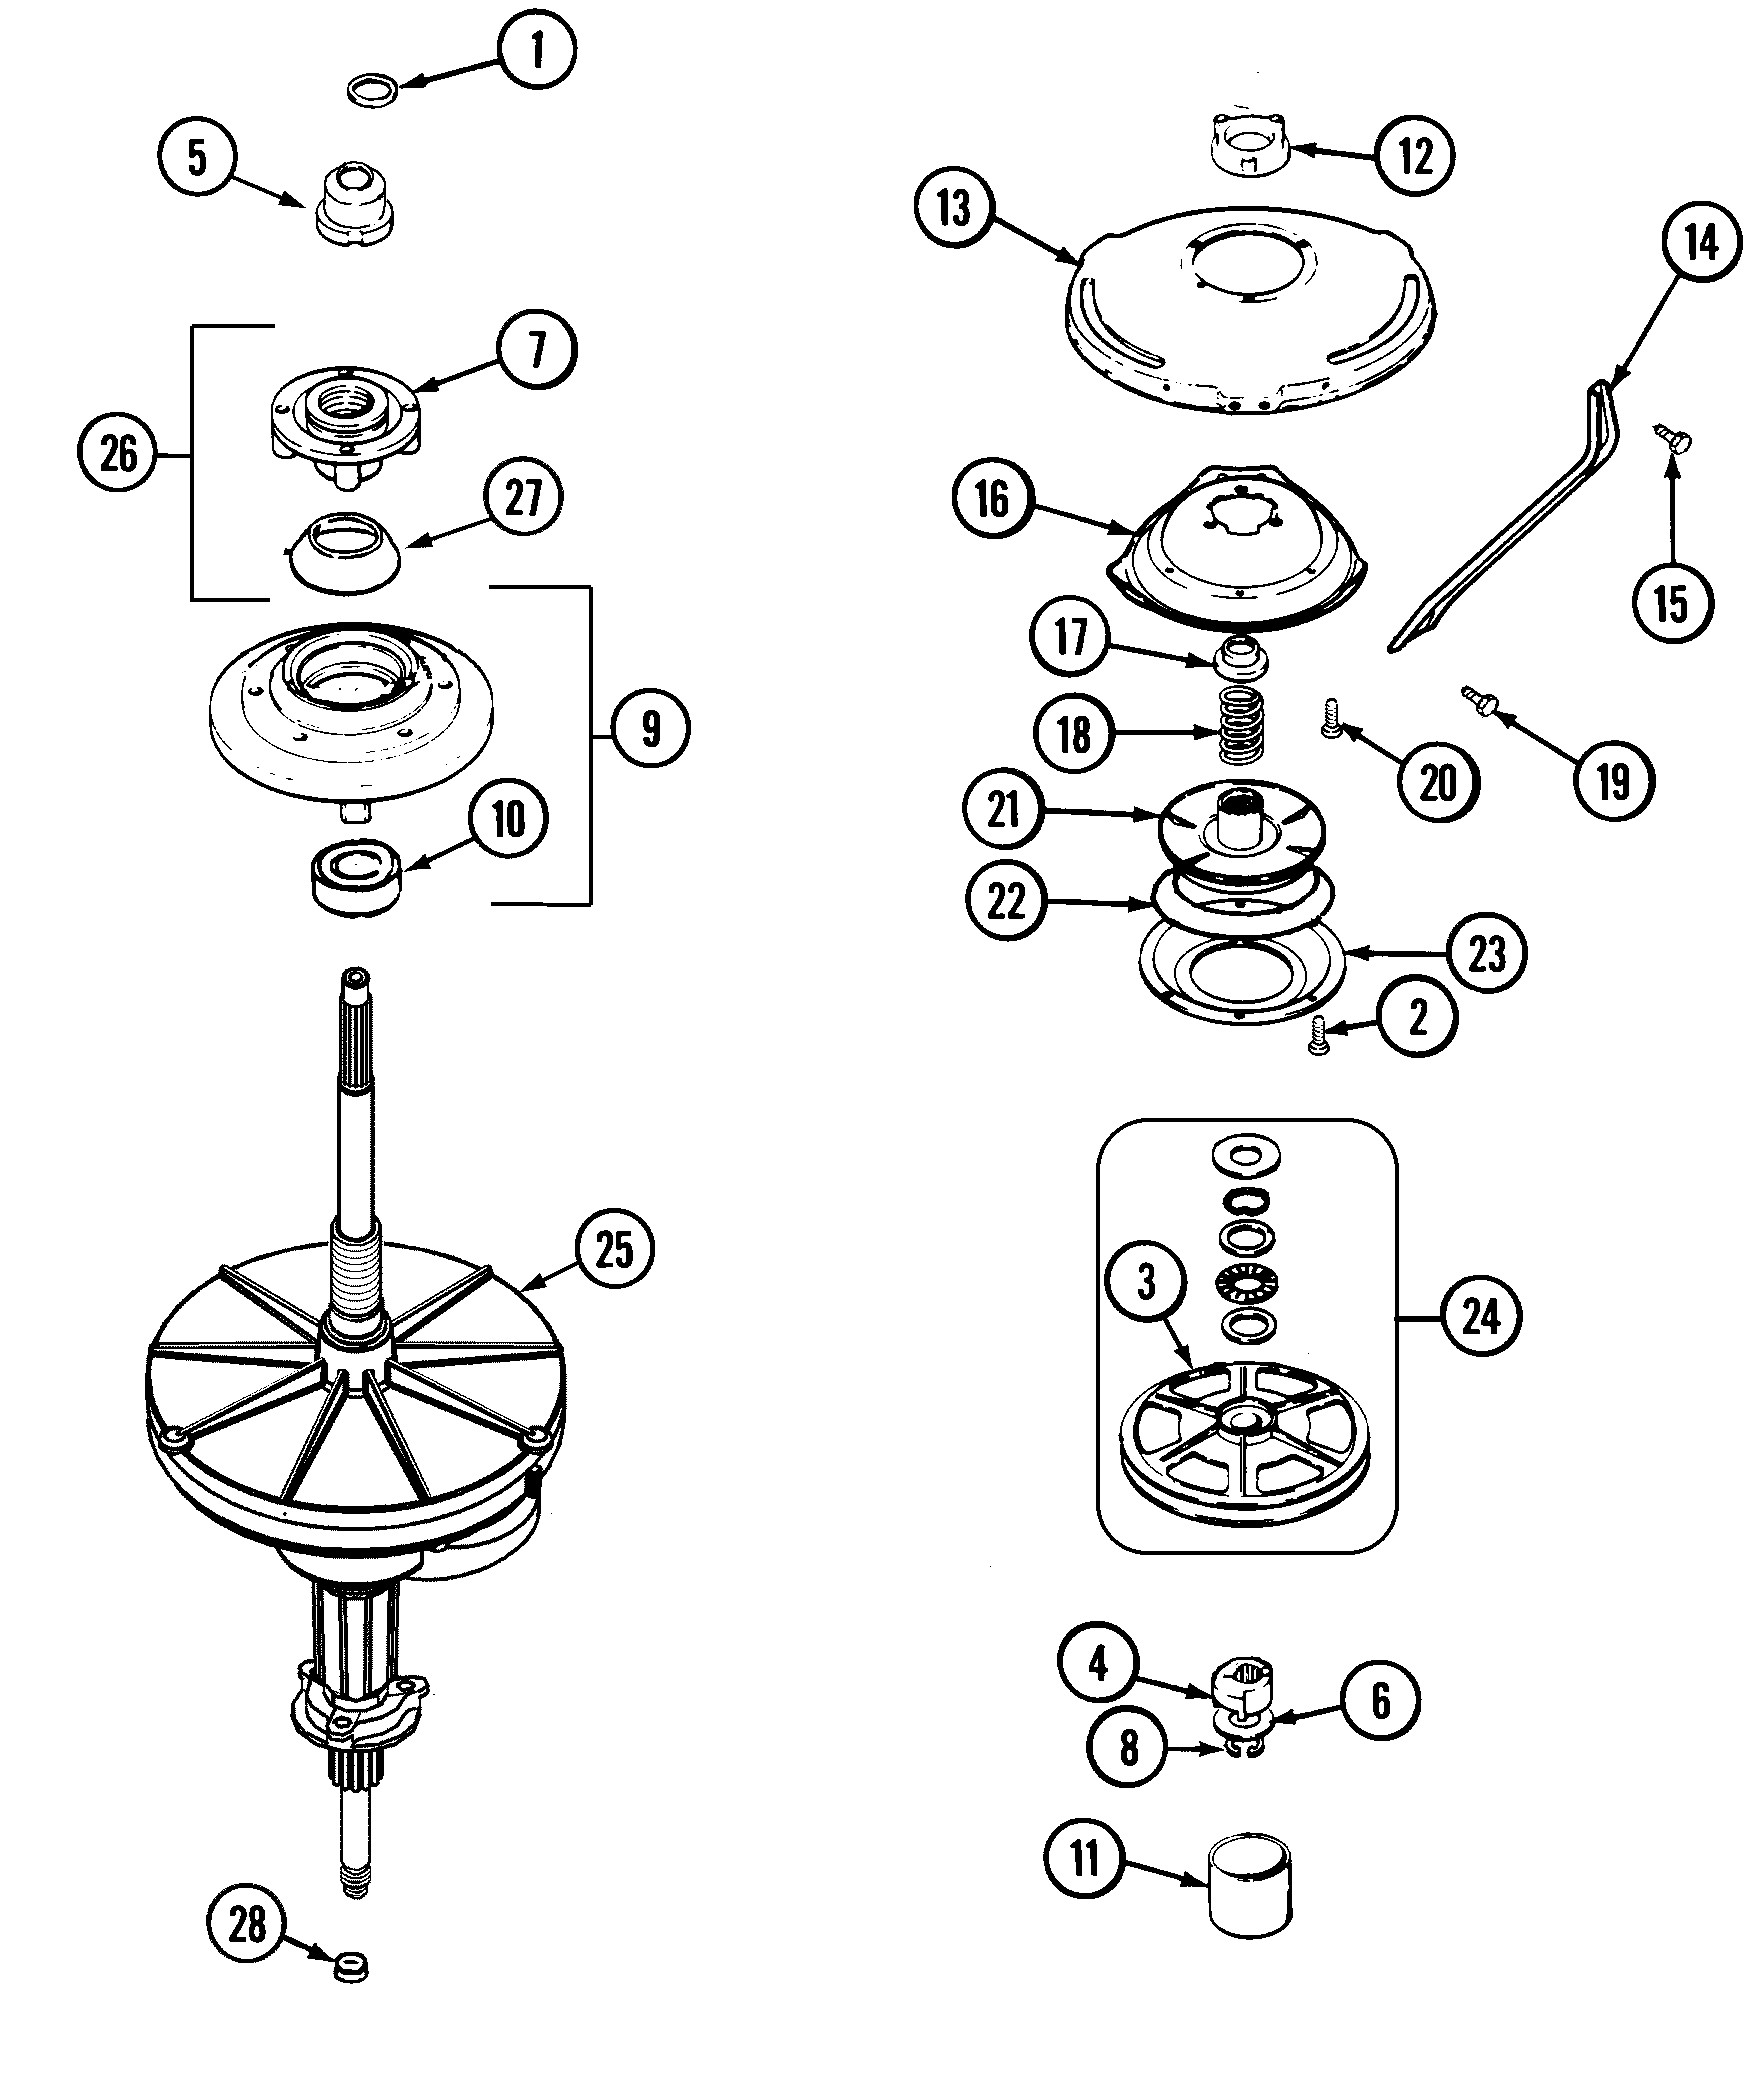 Frigidaire Washer Parts Diagram Maytag Model Mav6057awq Residential Washers Genuine Parts Of Frigidaire Washer Parts Diagram